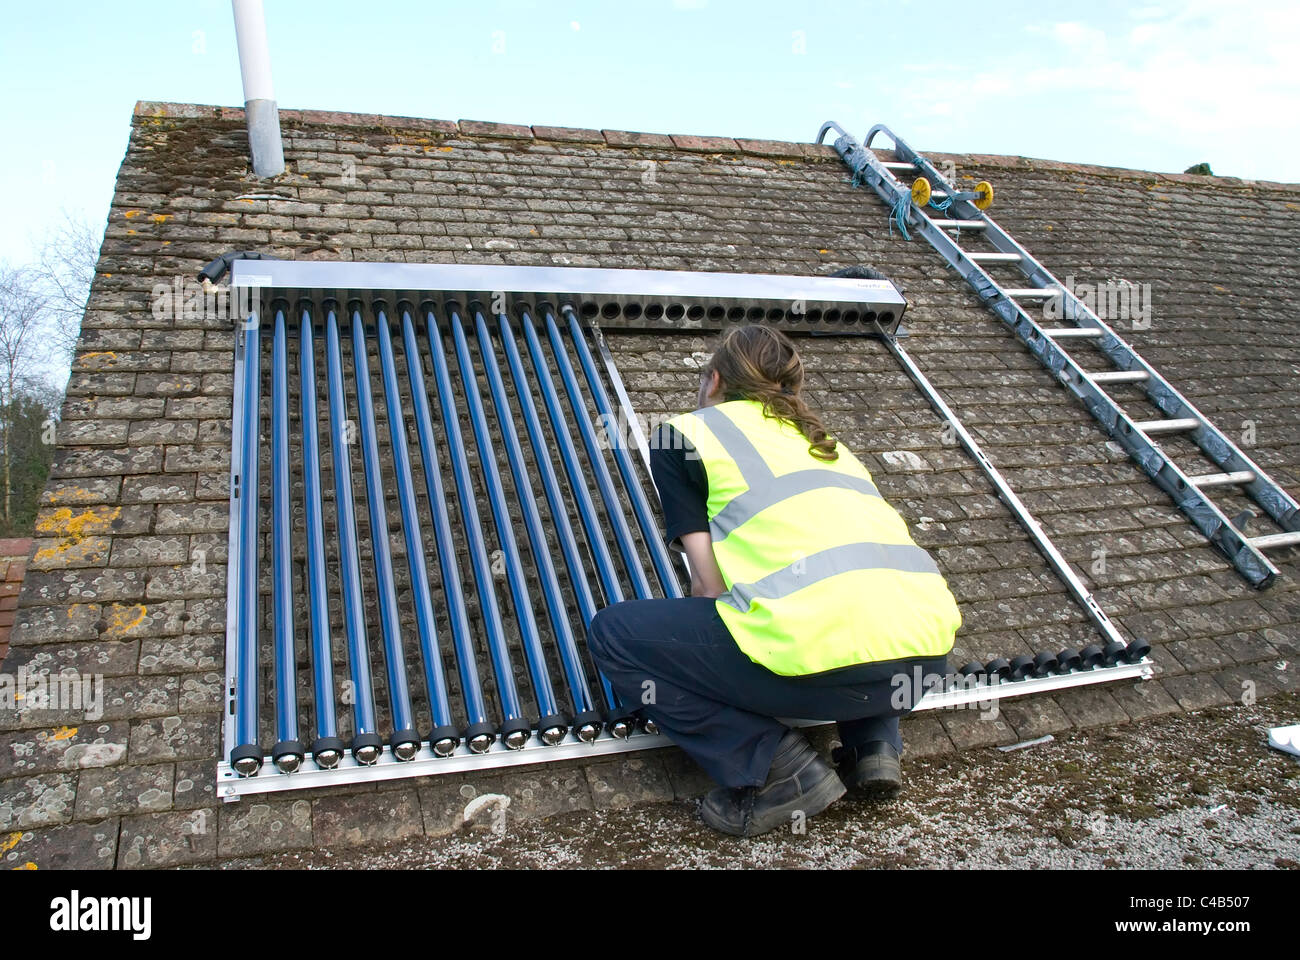 Engineers installing solar thermal evacuated tube array on the roof of a domestic house to provide renewable heat and hot water Stock Photo